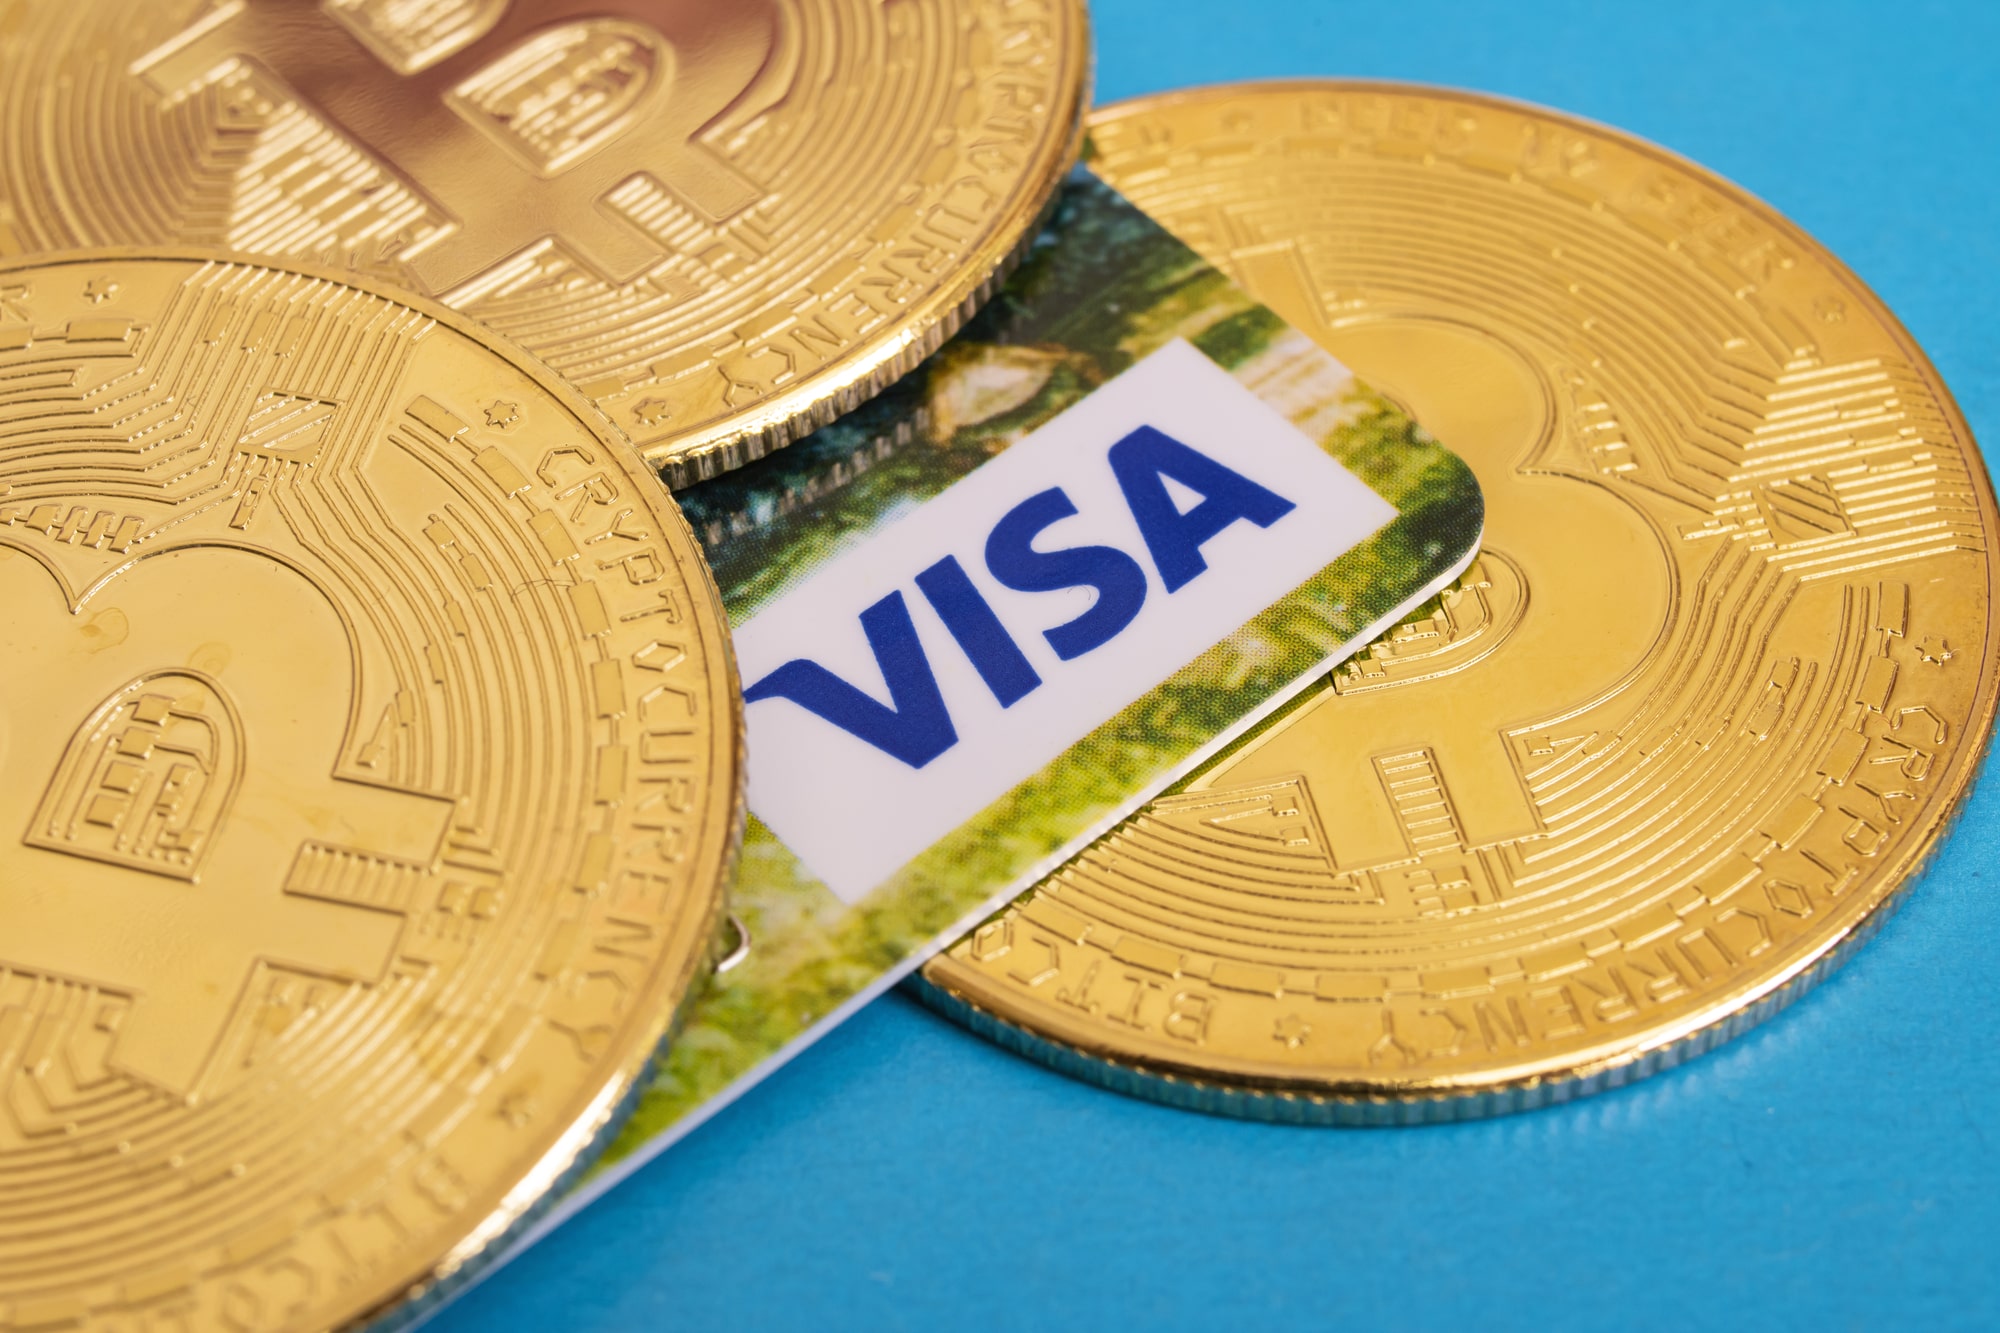 Visa outlines plans to bring crypto services to Brazil